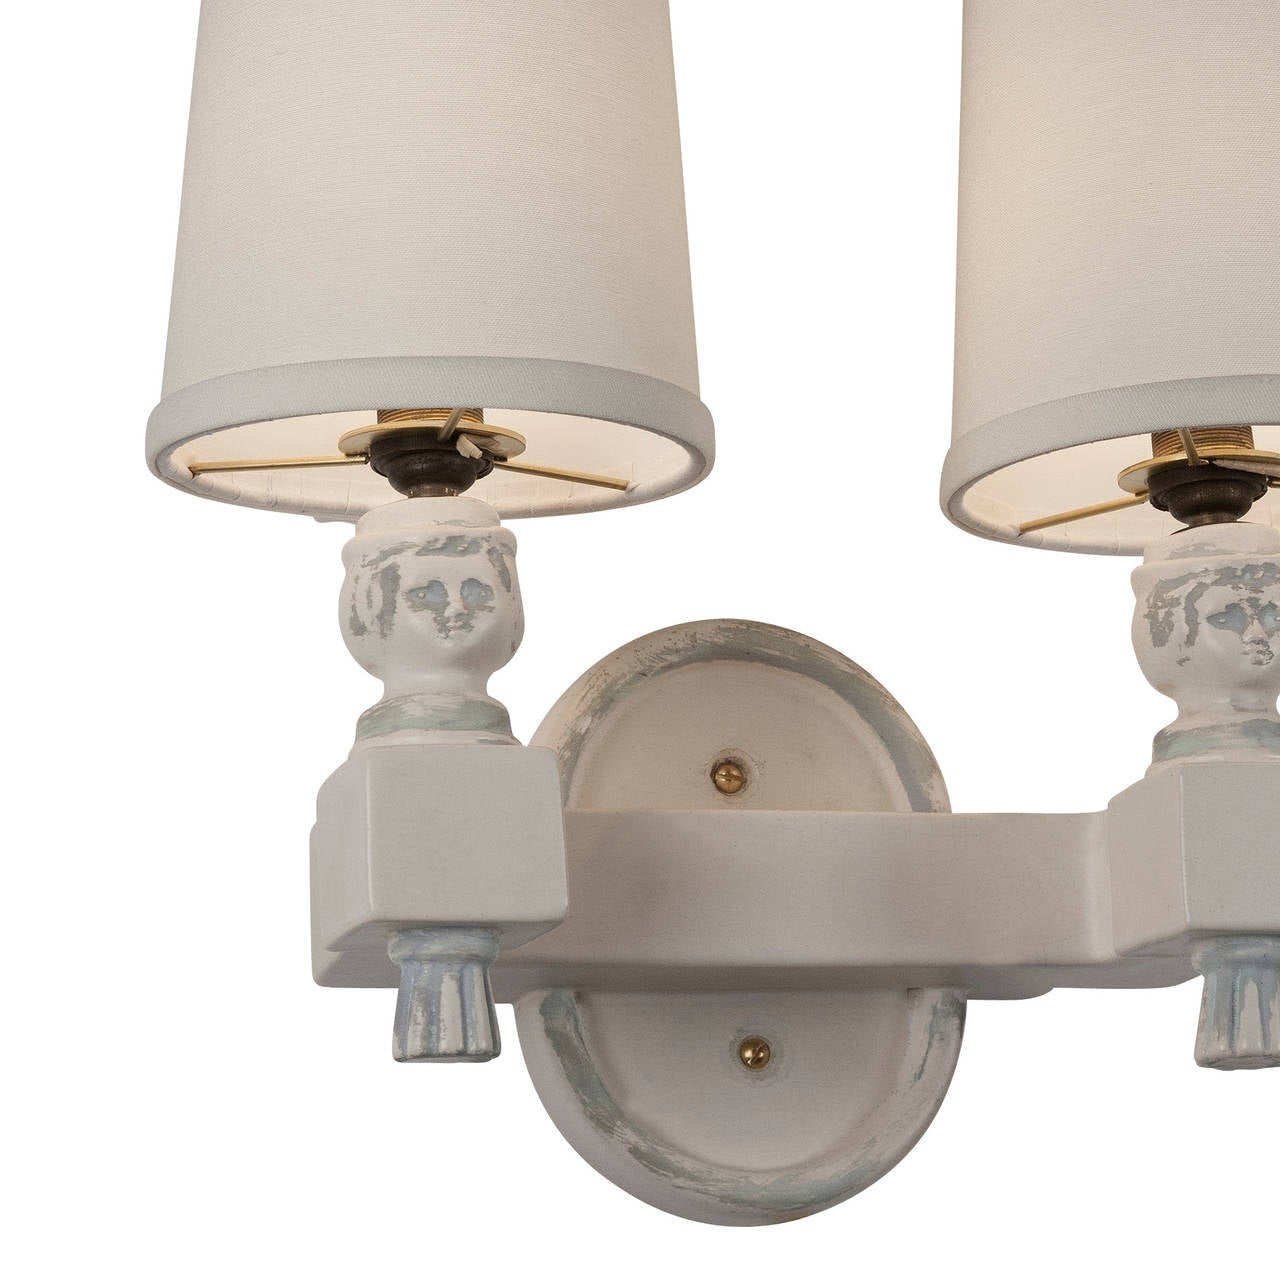 Antiqued ceramic two-arm sconces, the two curved block arms emanating from a center oval backplate, with female head form on each arm, just below custom shades. French 1940s. In the style of André Arbus. Overall dimensions: height 12 in, width 13